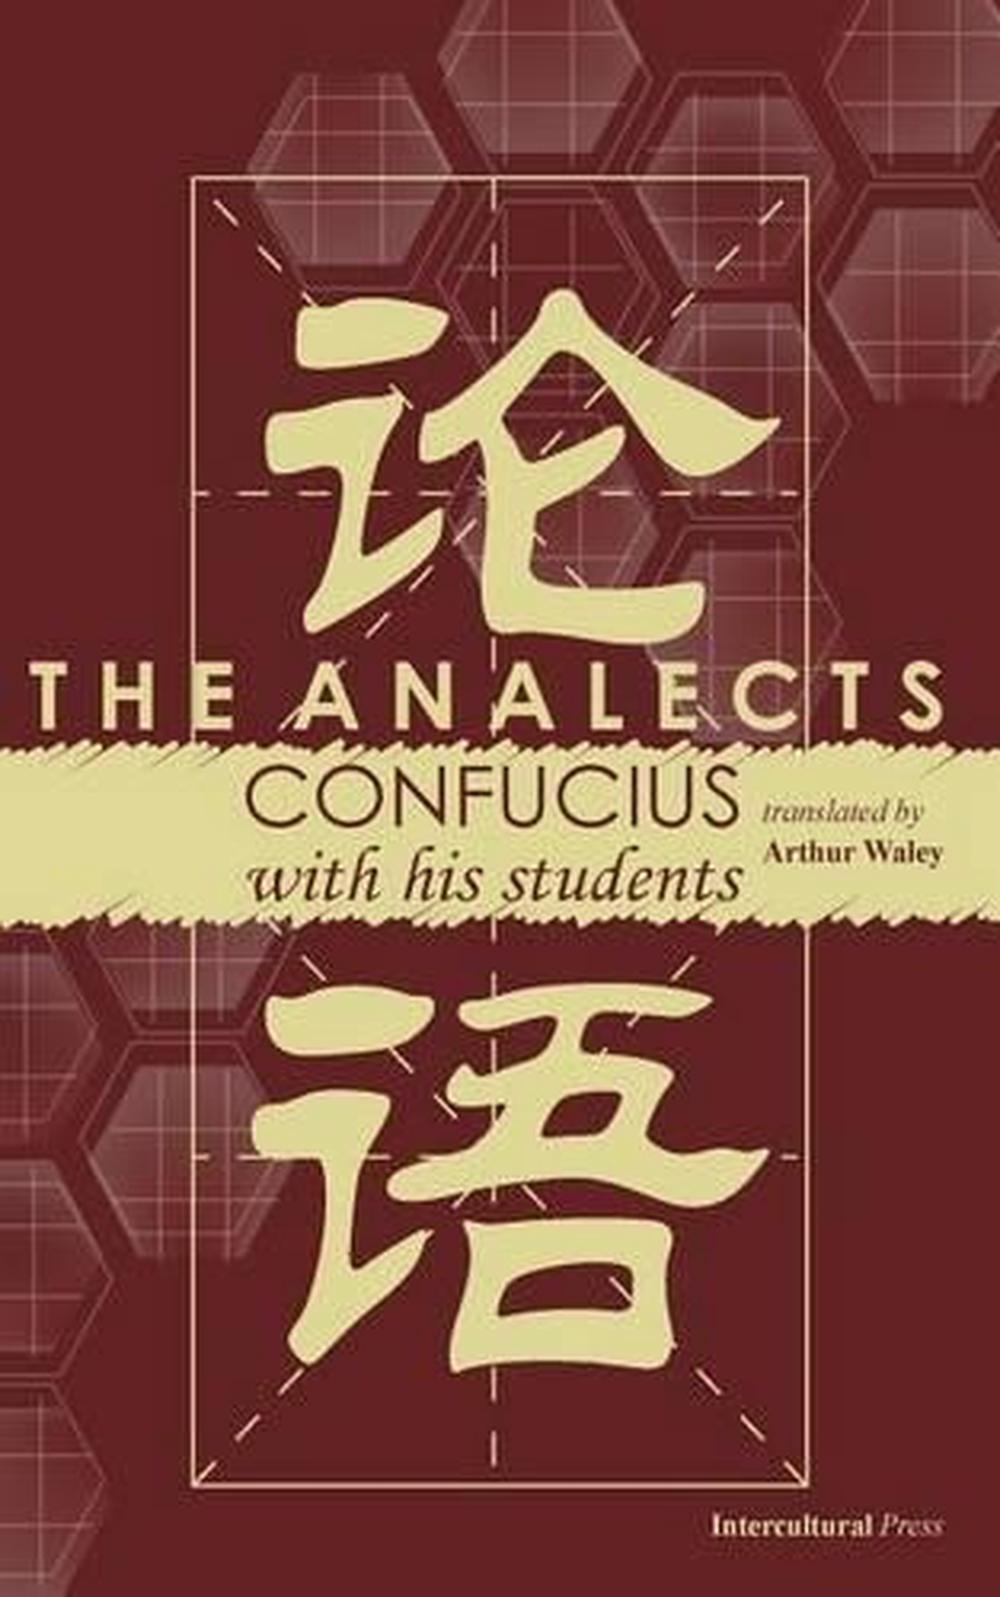 the analects meaning